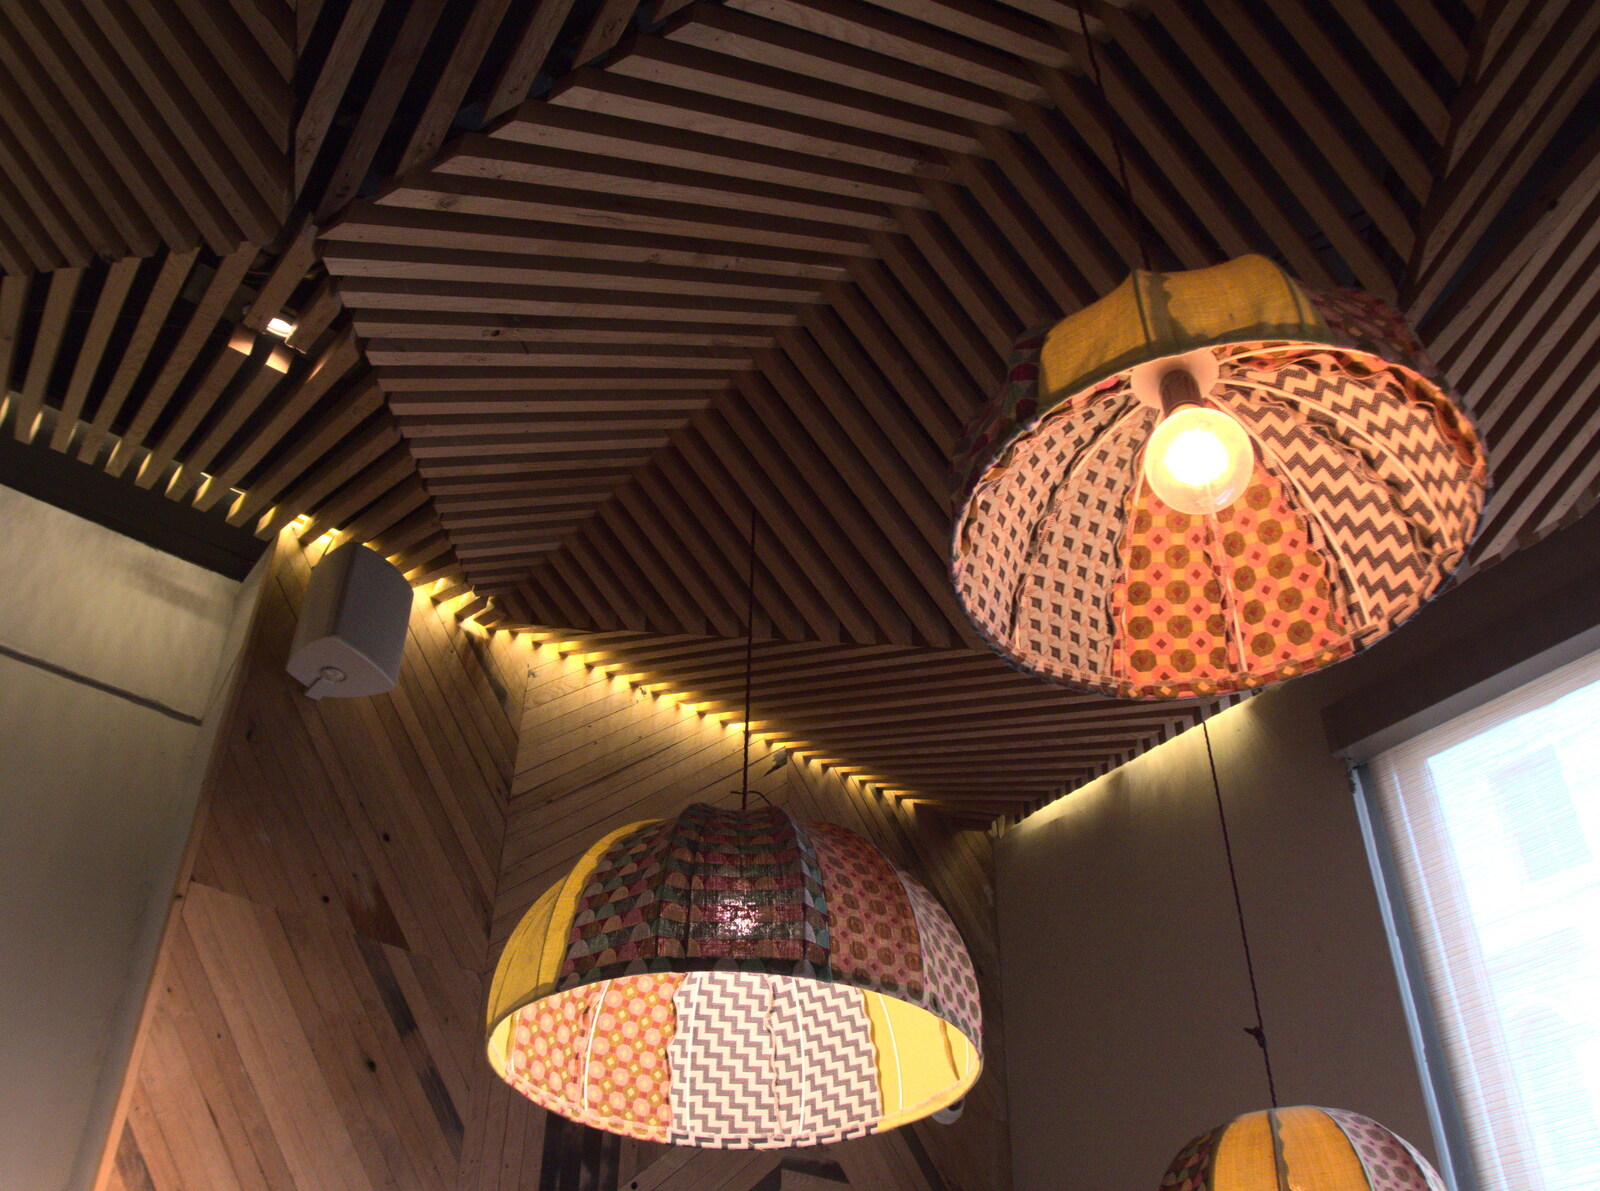 Interesting ceiling and lampshades from Sunday Lunch and a SwiftKey Trip to Nando's, Thornham and Bayswater - 22nd February 2020